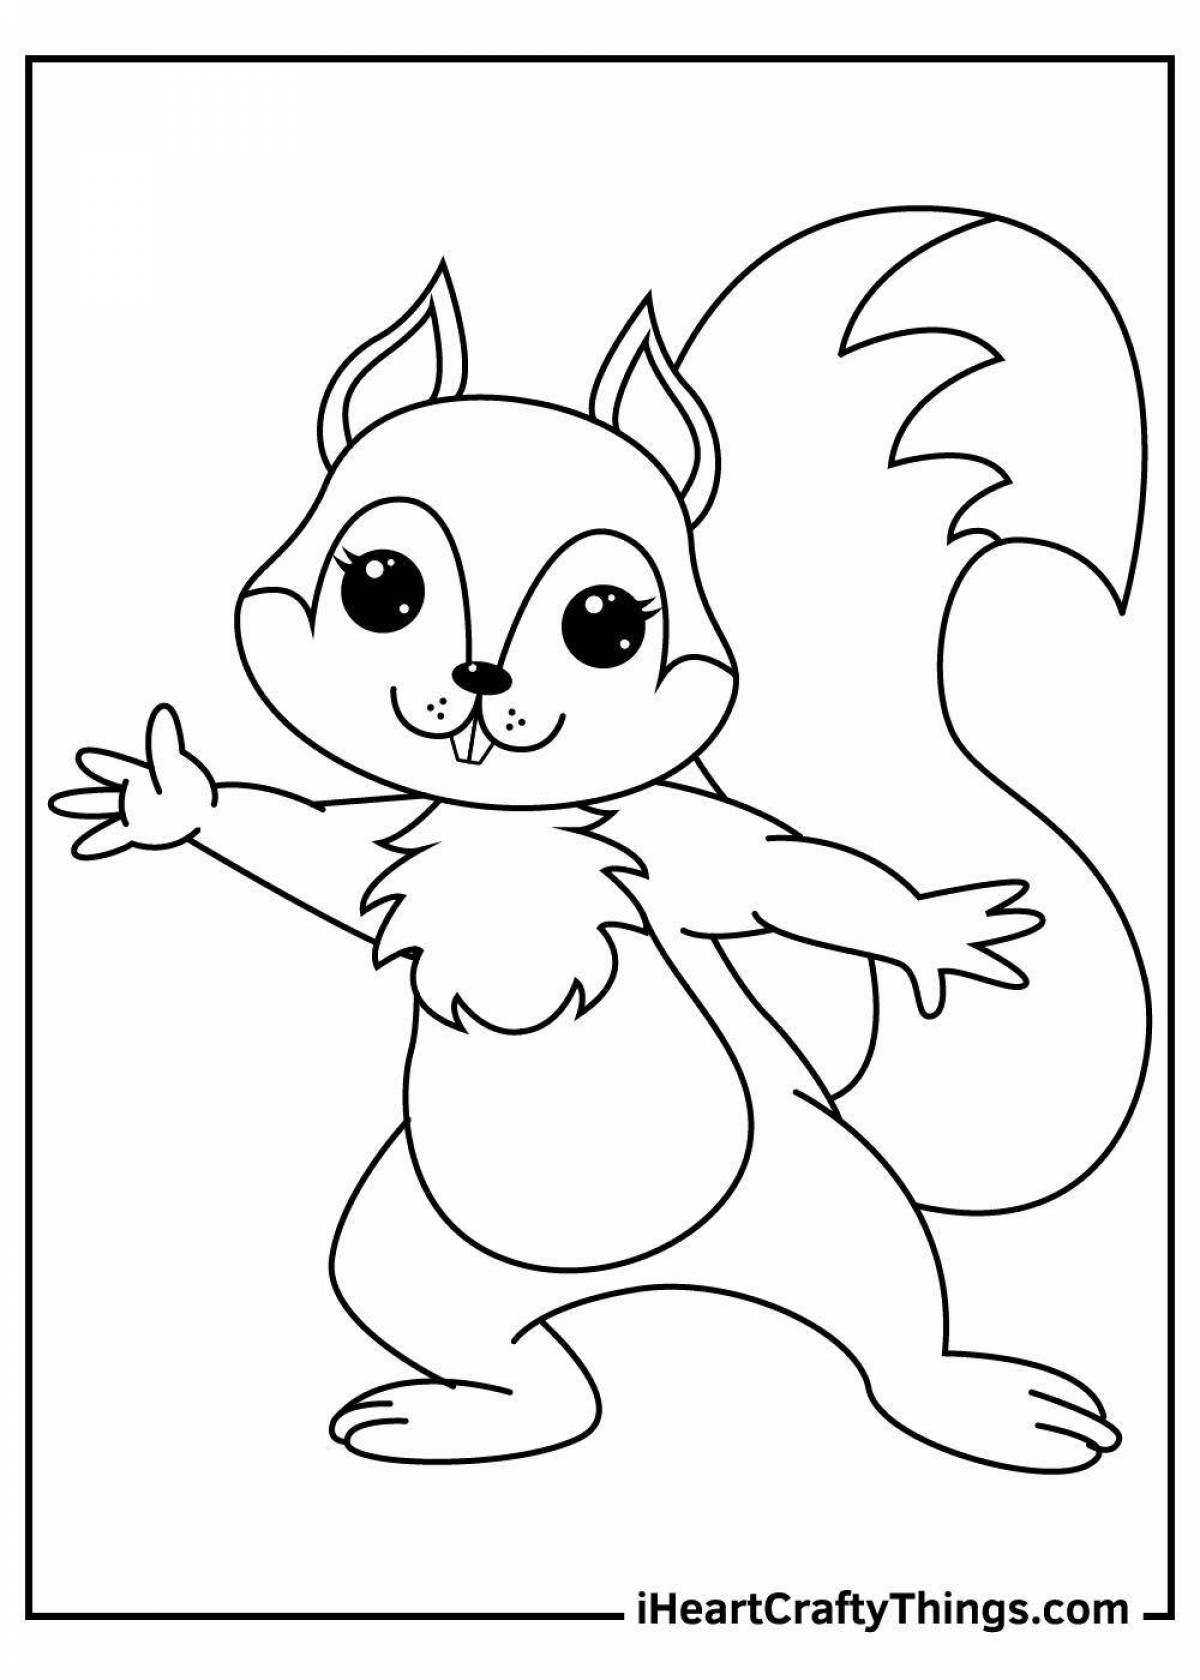 Adorable little squirrel coloring book